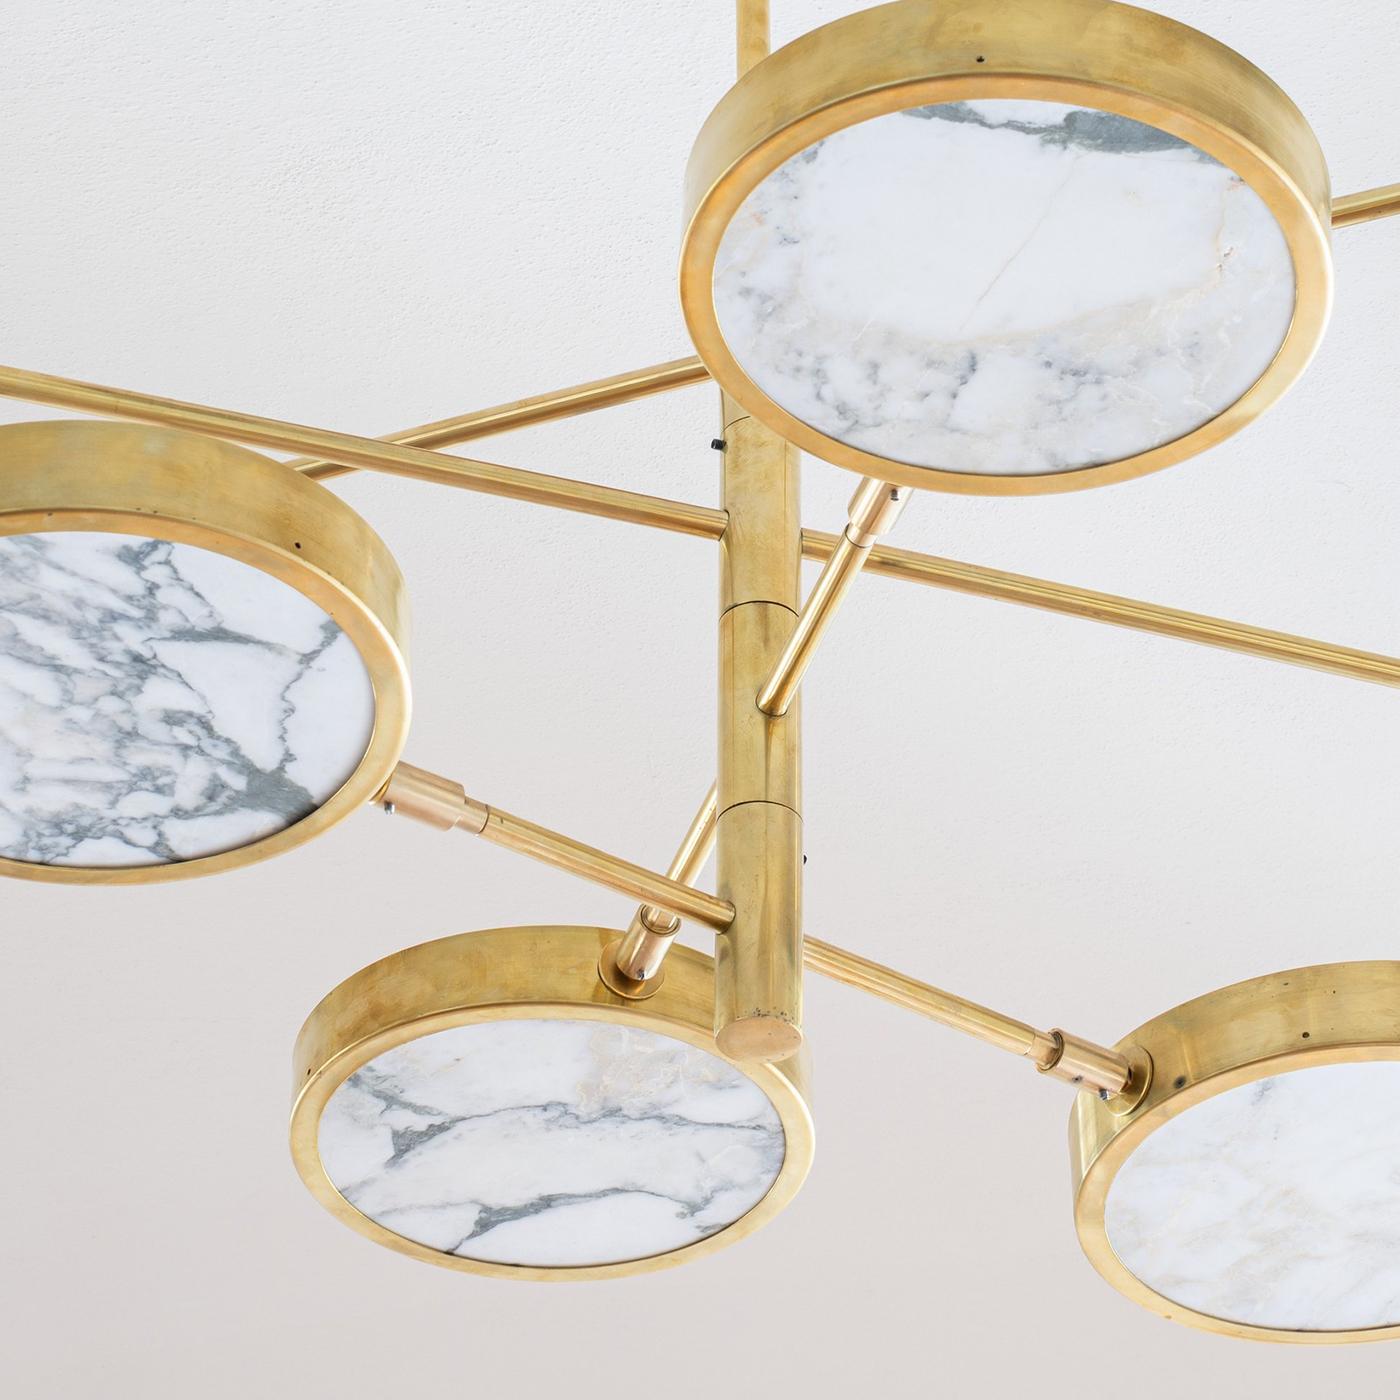 An orbital structure allowing for endless configurations defines this precious golden chandelier. The warm tone of its eight-light structure is splendidly matched by the golden veins of the thin Calacatta Oro marble disks, which release a sublime